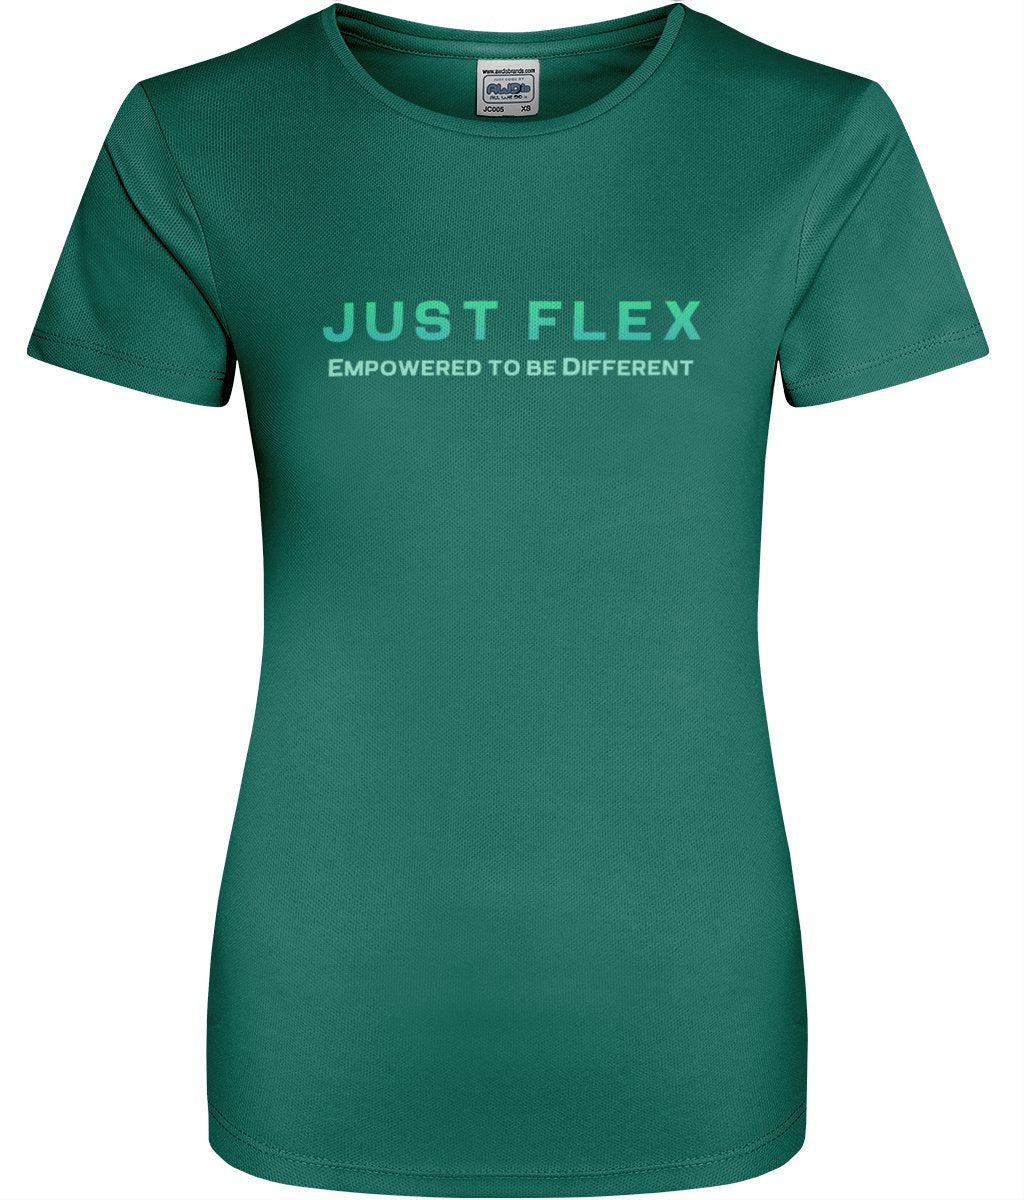 Just Flex - Empowered To Be Different Womens Just Cool Sports T-shirt